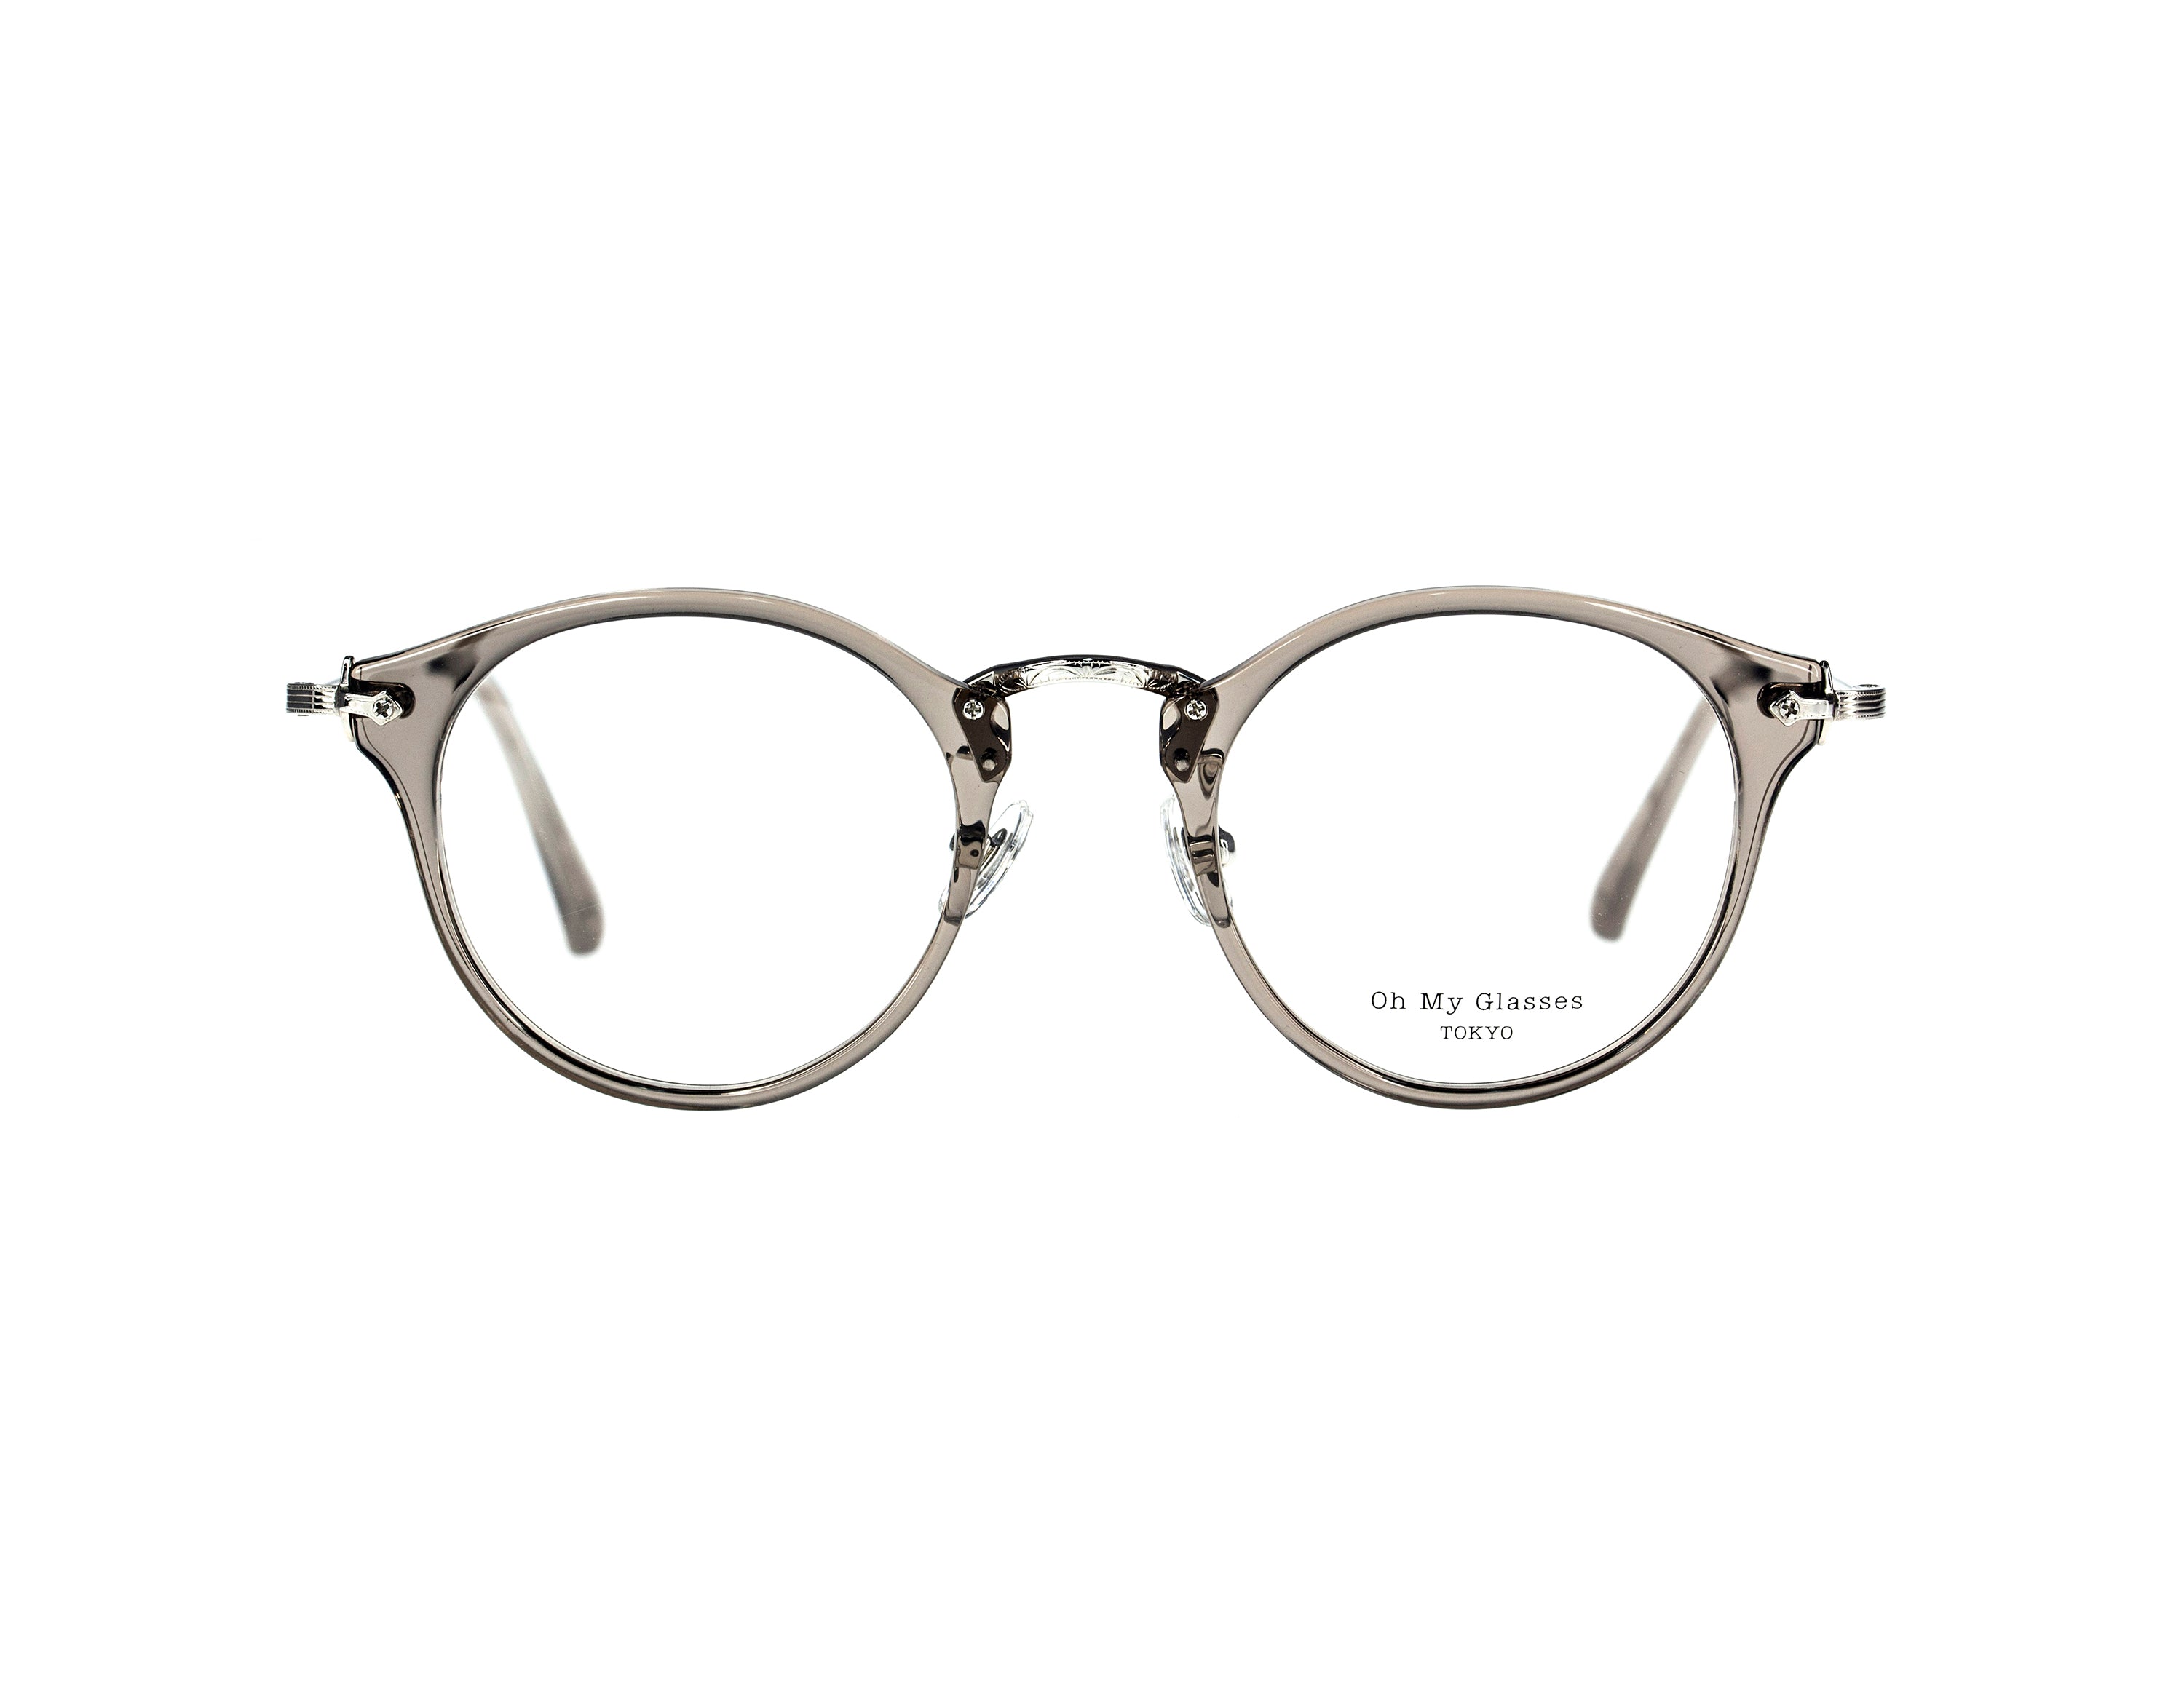 Oh My Glasses - Luke omg-103-35-20【 Blackzmith Exclusive Limited Edition】